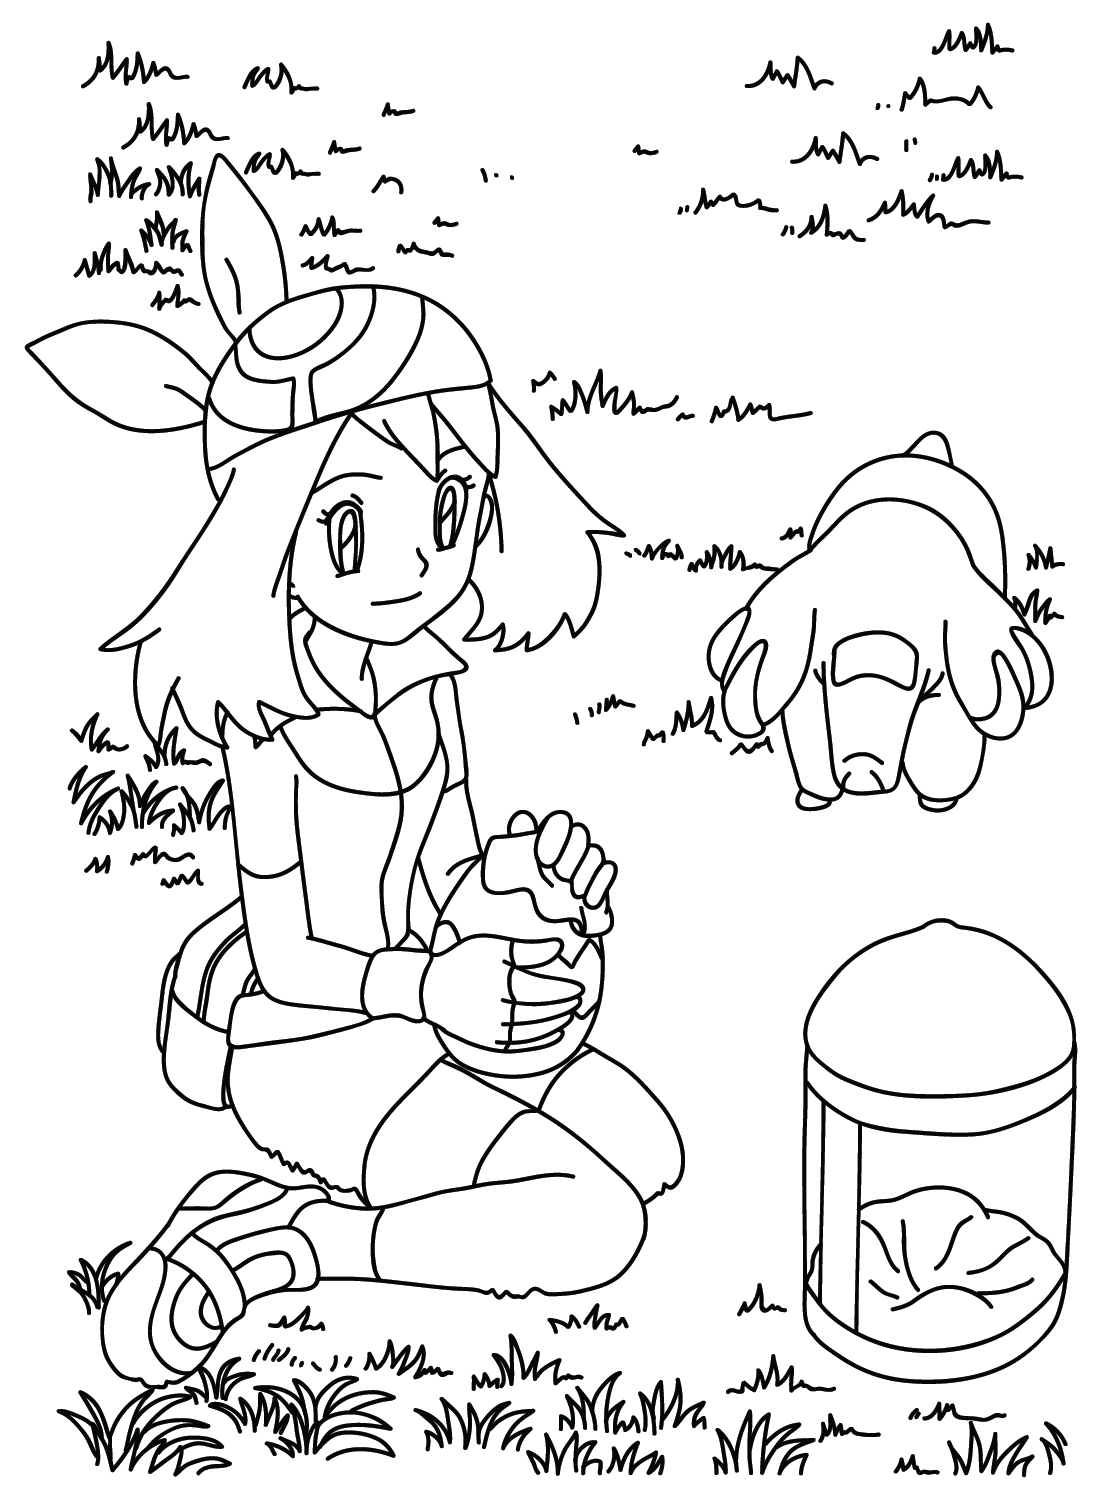 May of Pokemon Coloring Page from May Pokemon